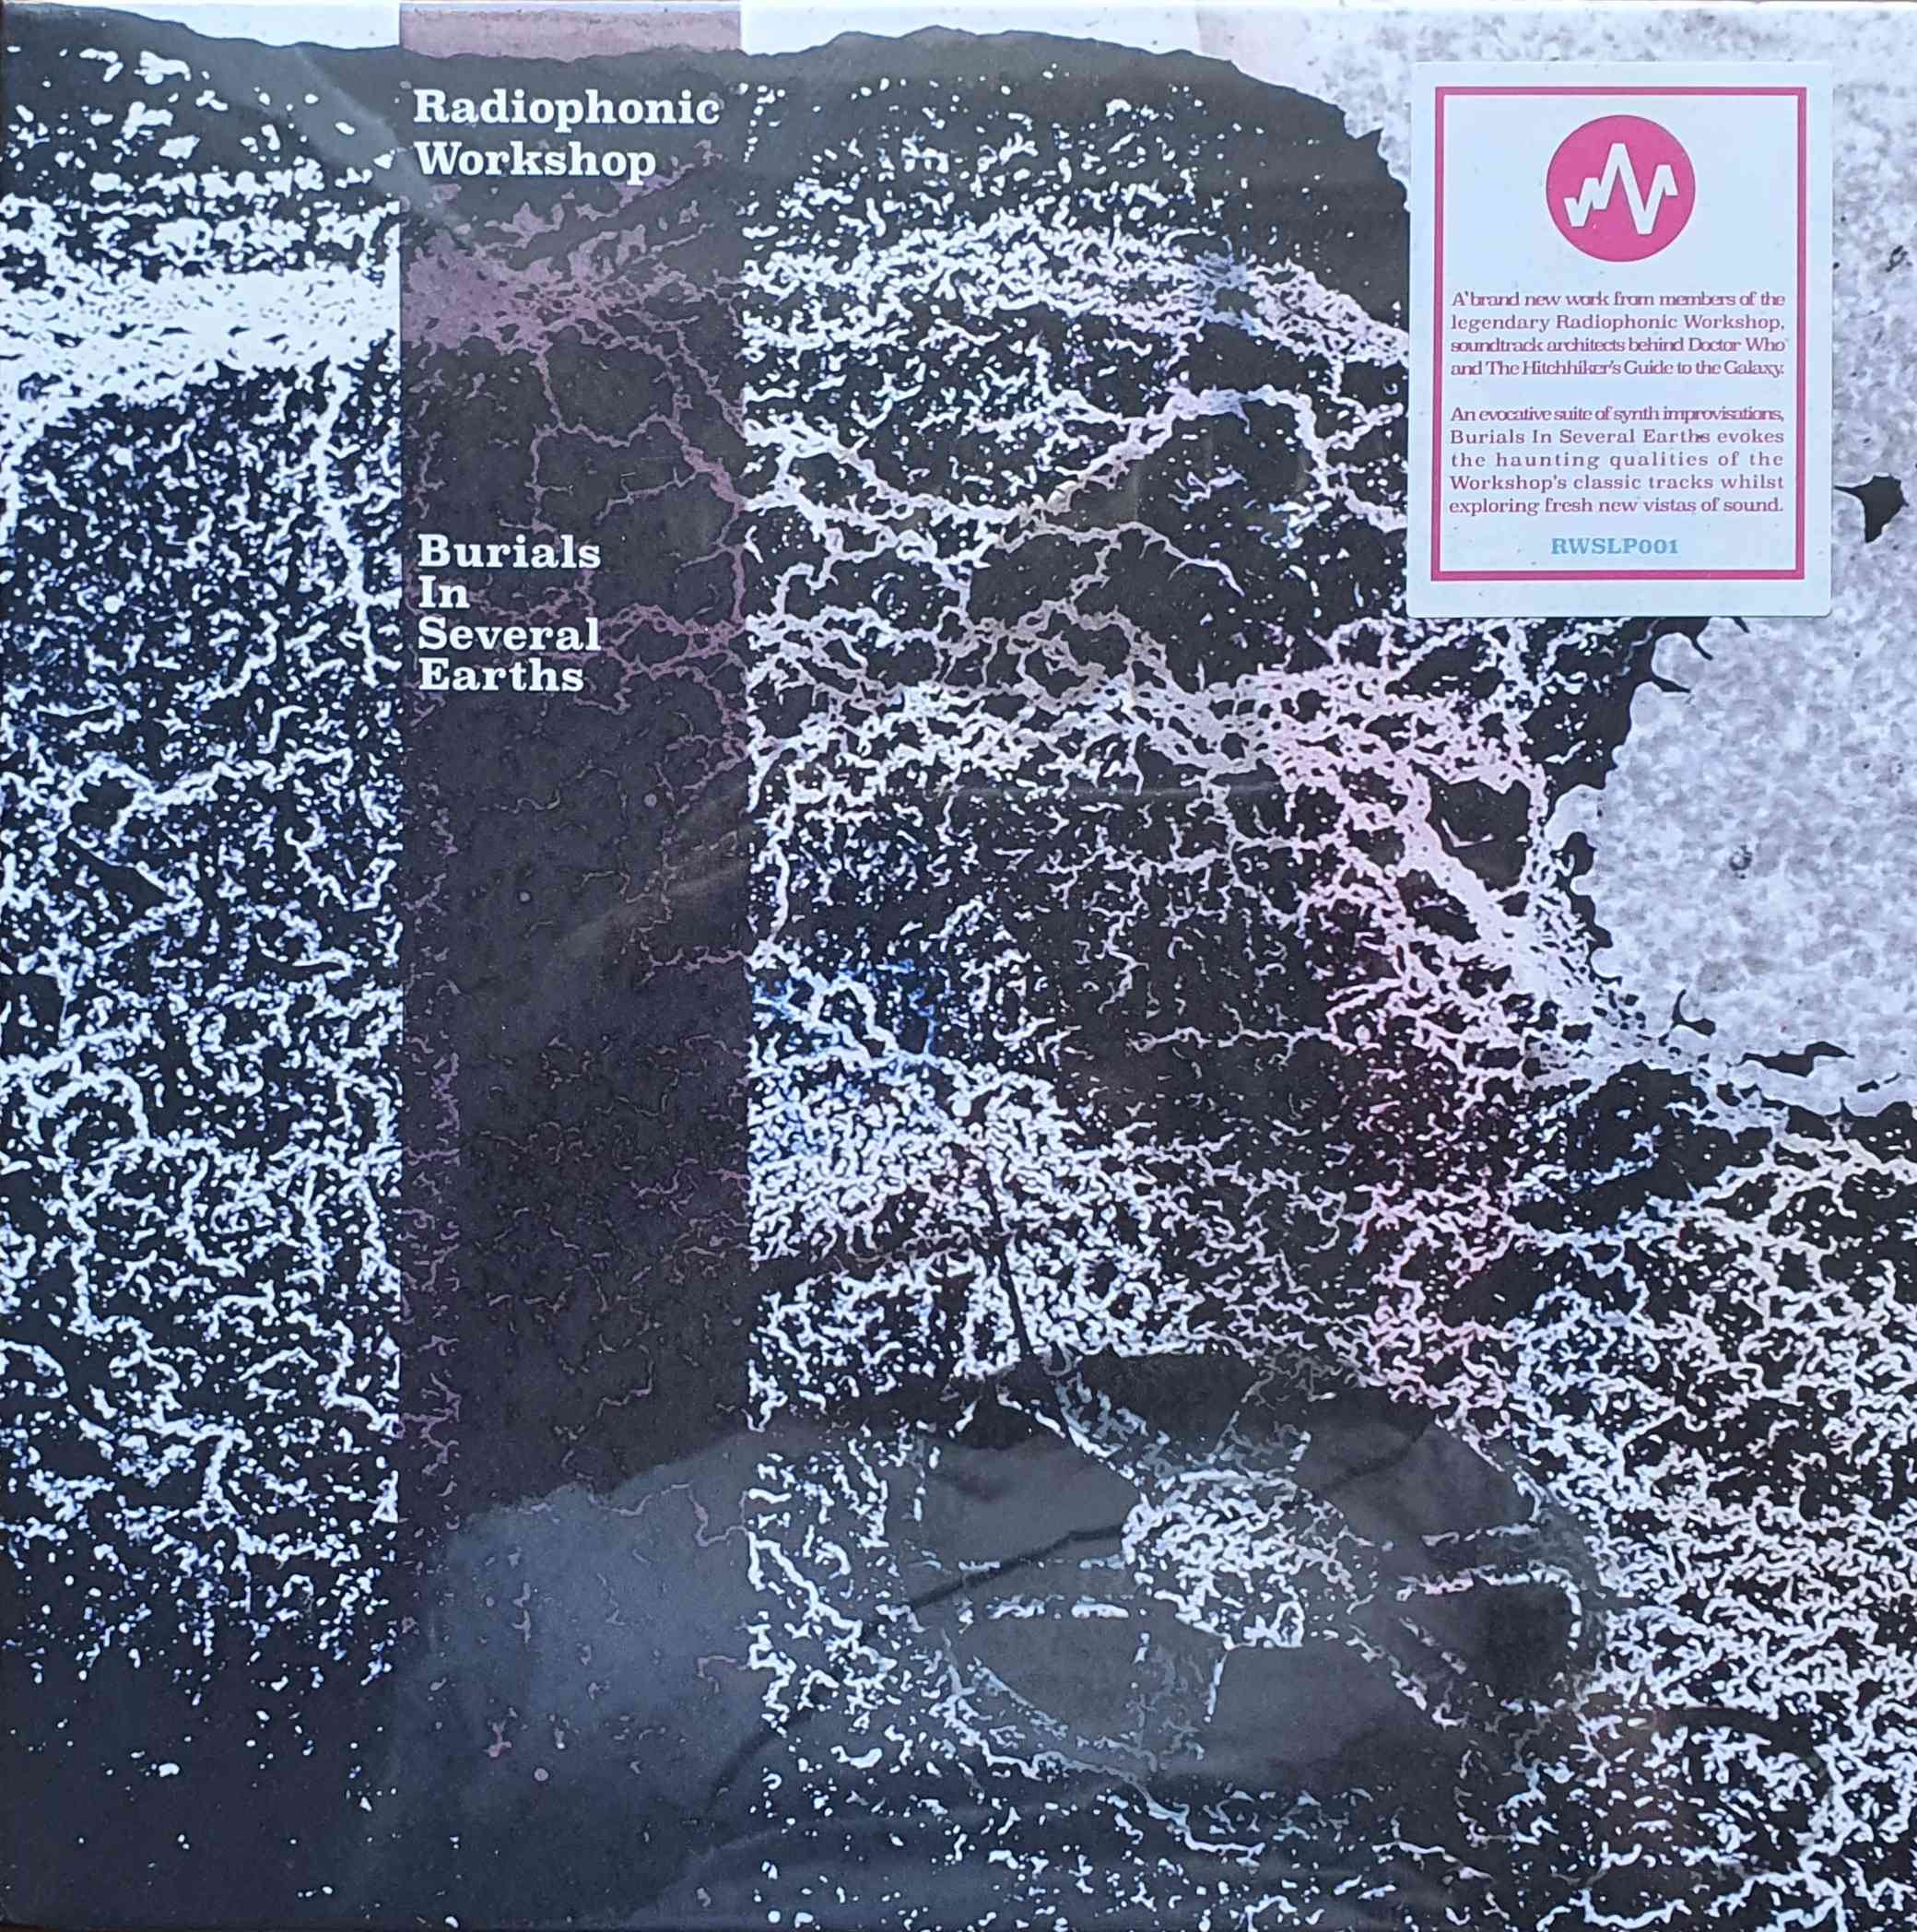 Picture of Burials in several Earths by artist Radiophonic Workshop from the BBC 10inches - Records and Tapes library